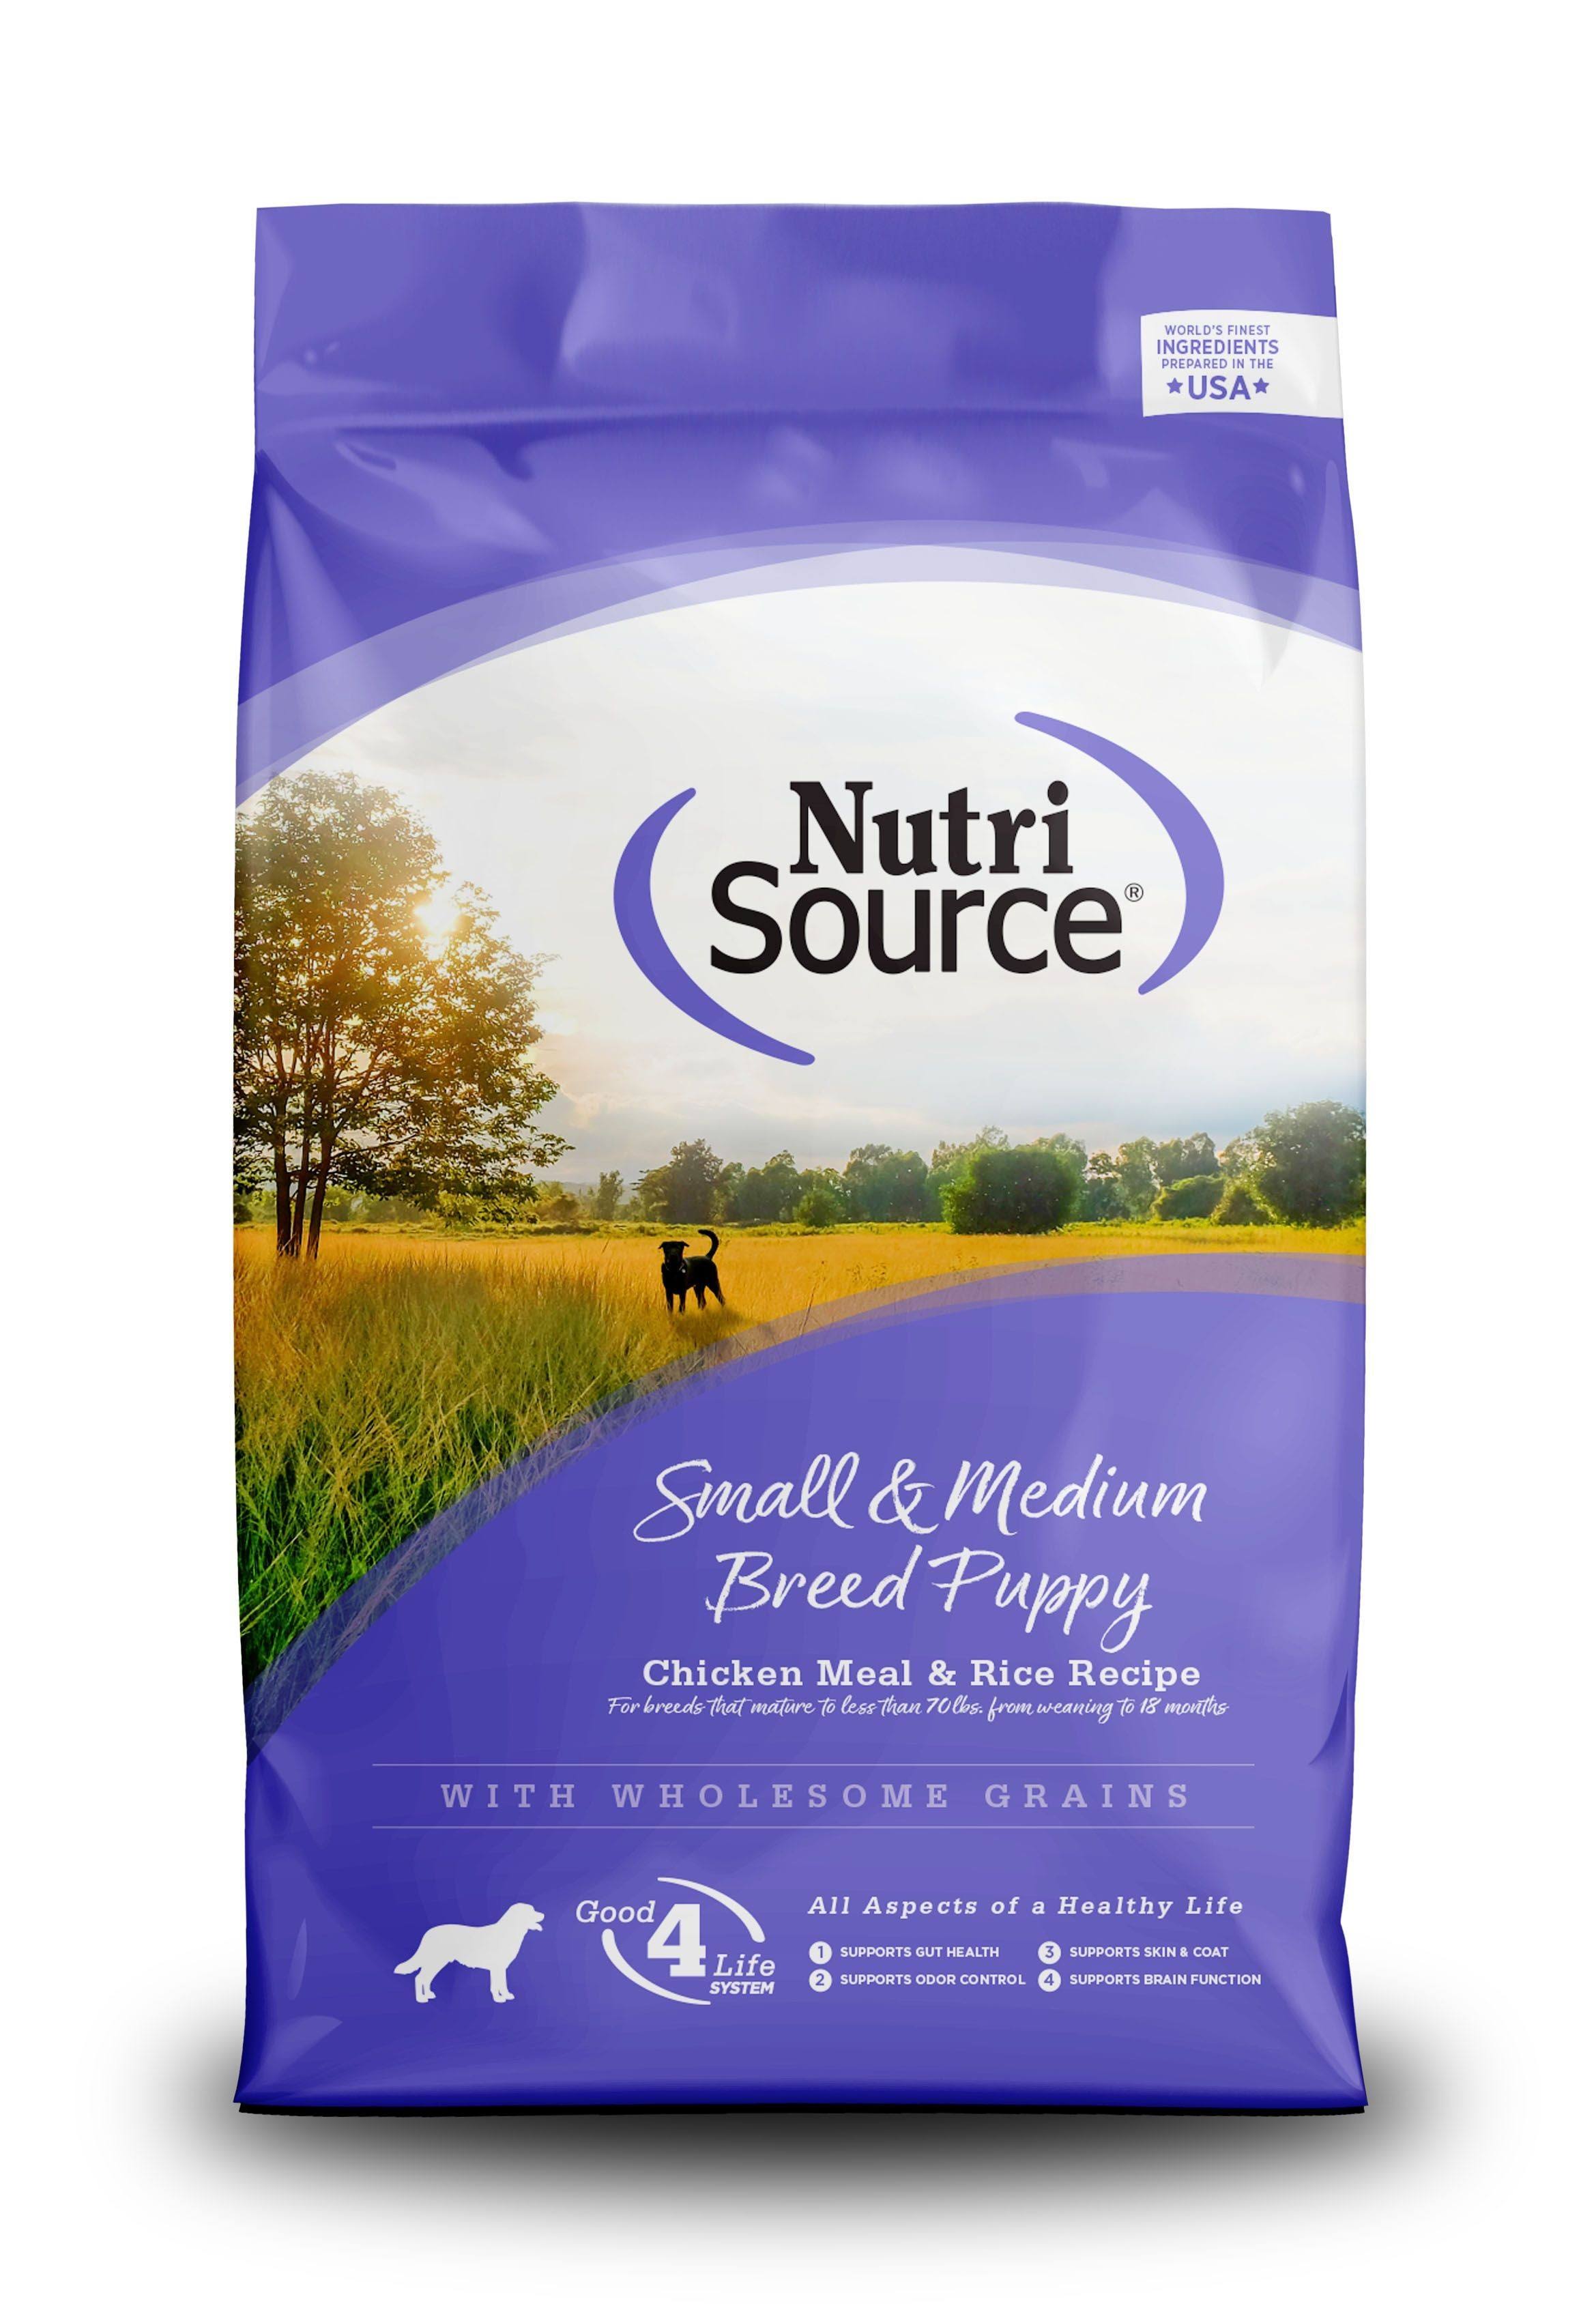 NutriSource Chicken & Rice Small/Medium Breed Puppy Dry Dog Food 30lb